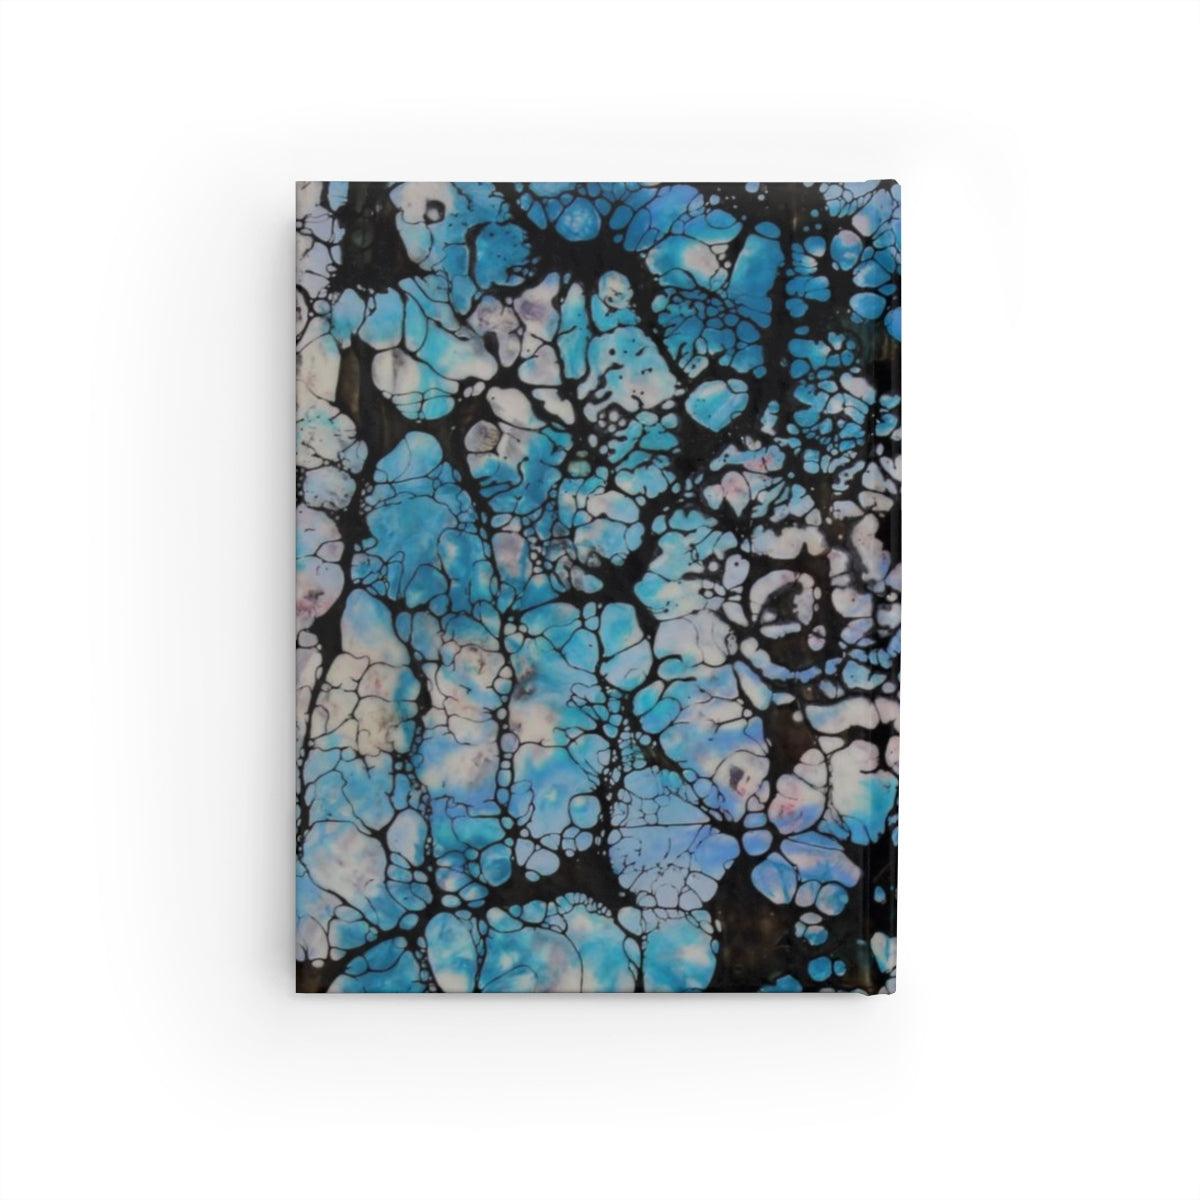 "Synapse" Journal - Ruled Line-Paper products - Mike Giannella - Encaustic Painting - Mixed Media Artist - Art Prints